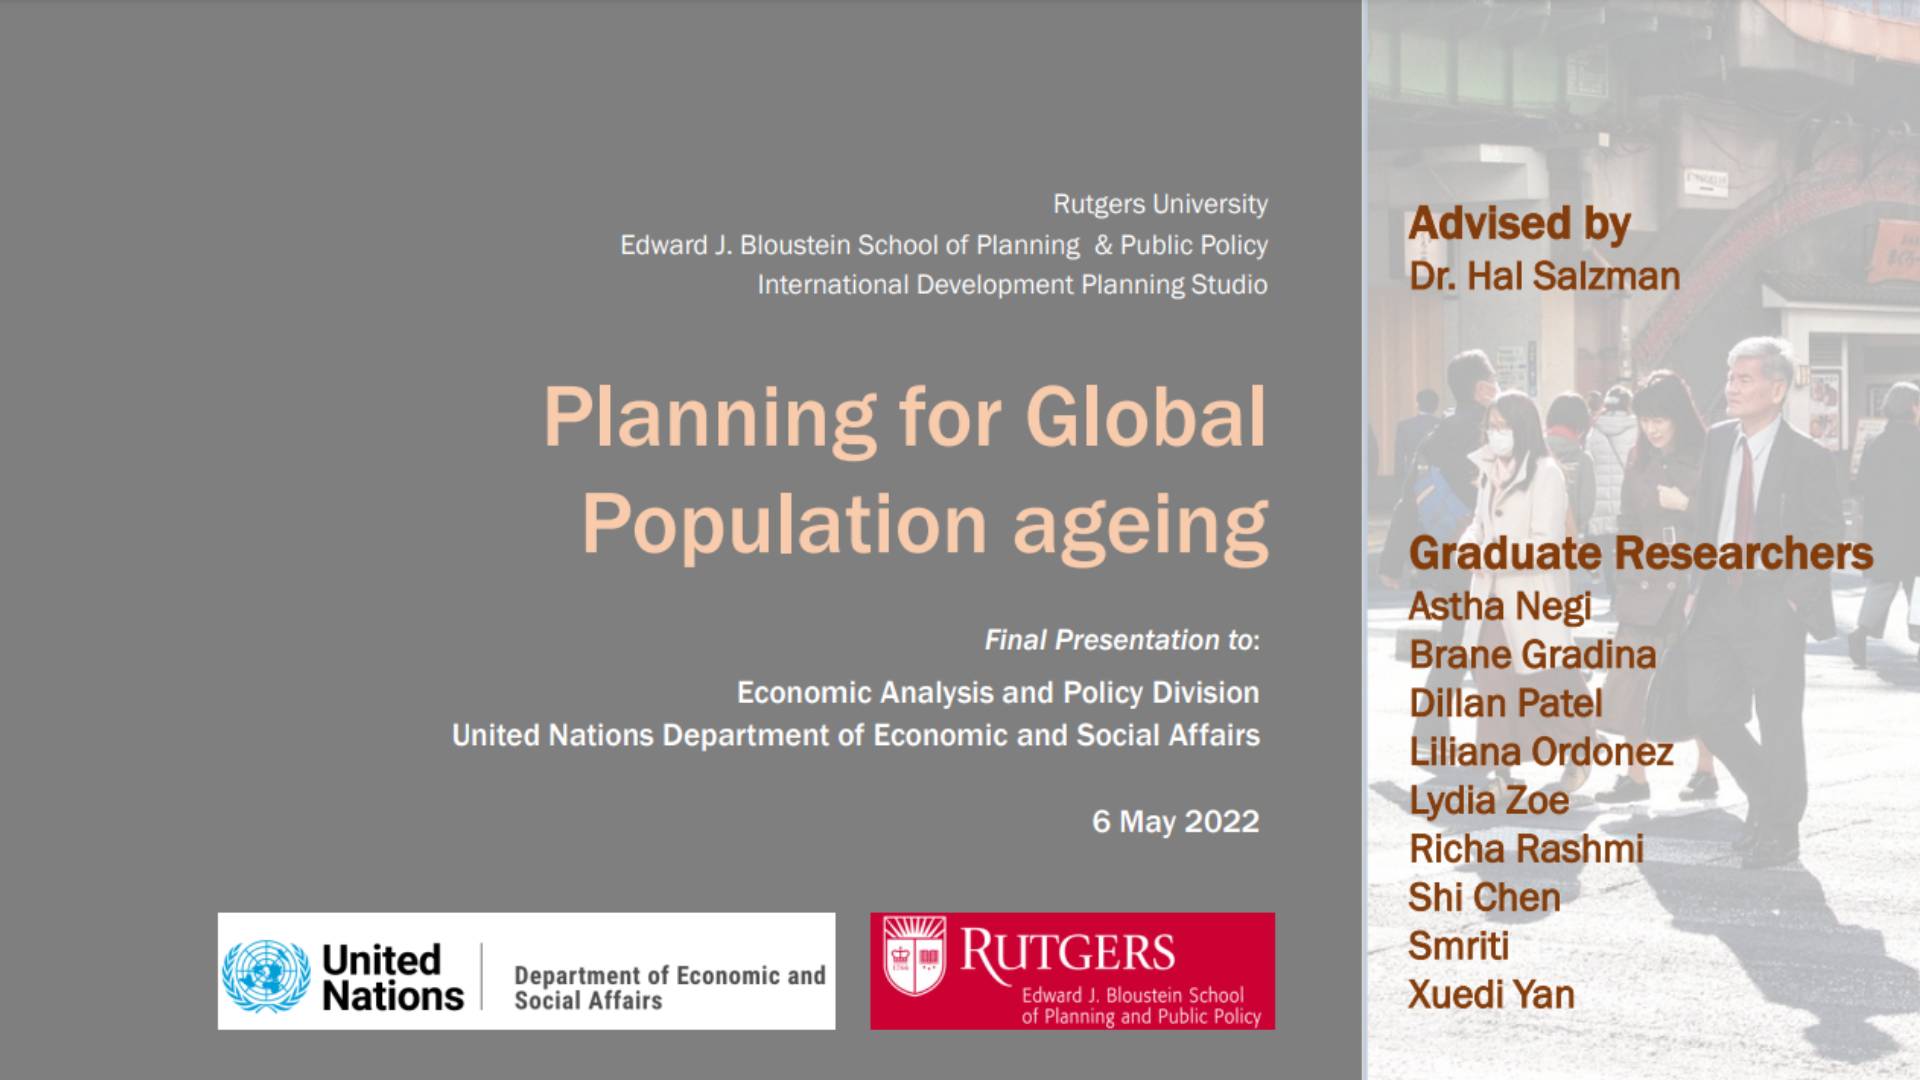 Planning for Global Population Ageing